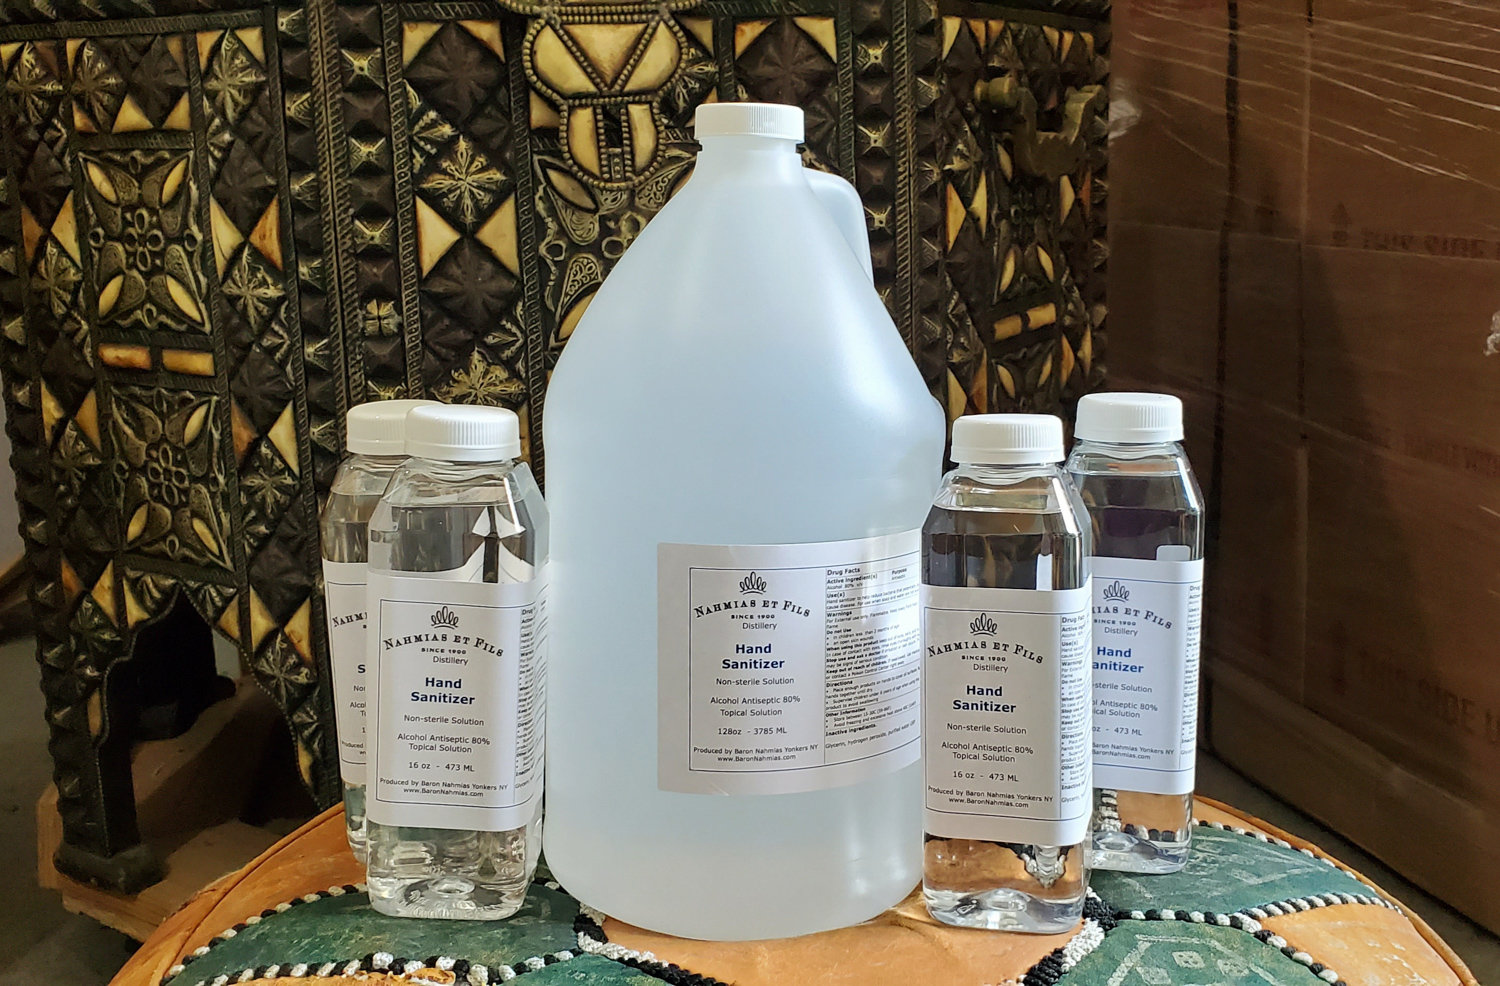 With hand sanitizer hard to come by on store shelves in the wake of the coronavirus pandemic, the Nahmias et Fils Distillery in Yonkers transitioned from producing liquor to hand sanitizer. North Riverdale’s David and Dorit Nahmias own the distillery.